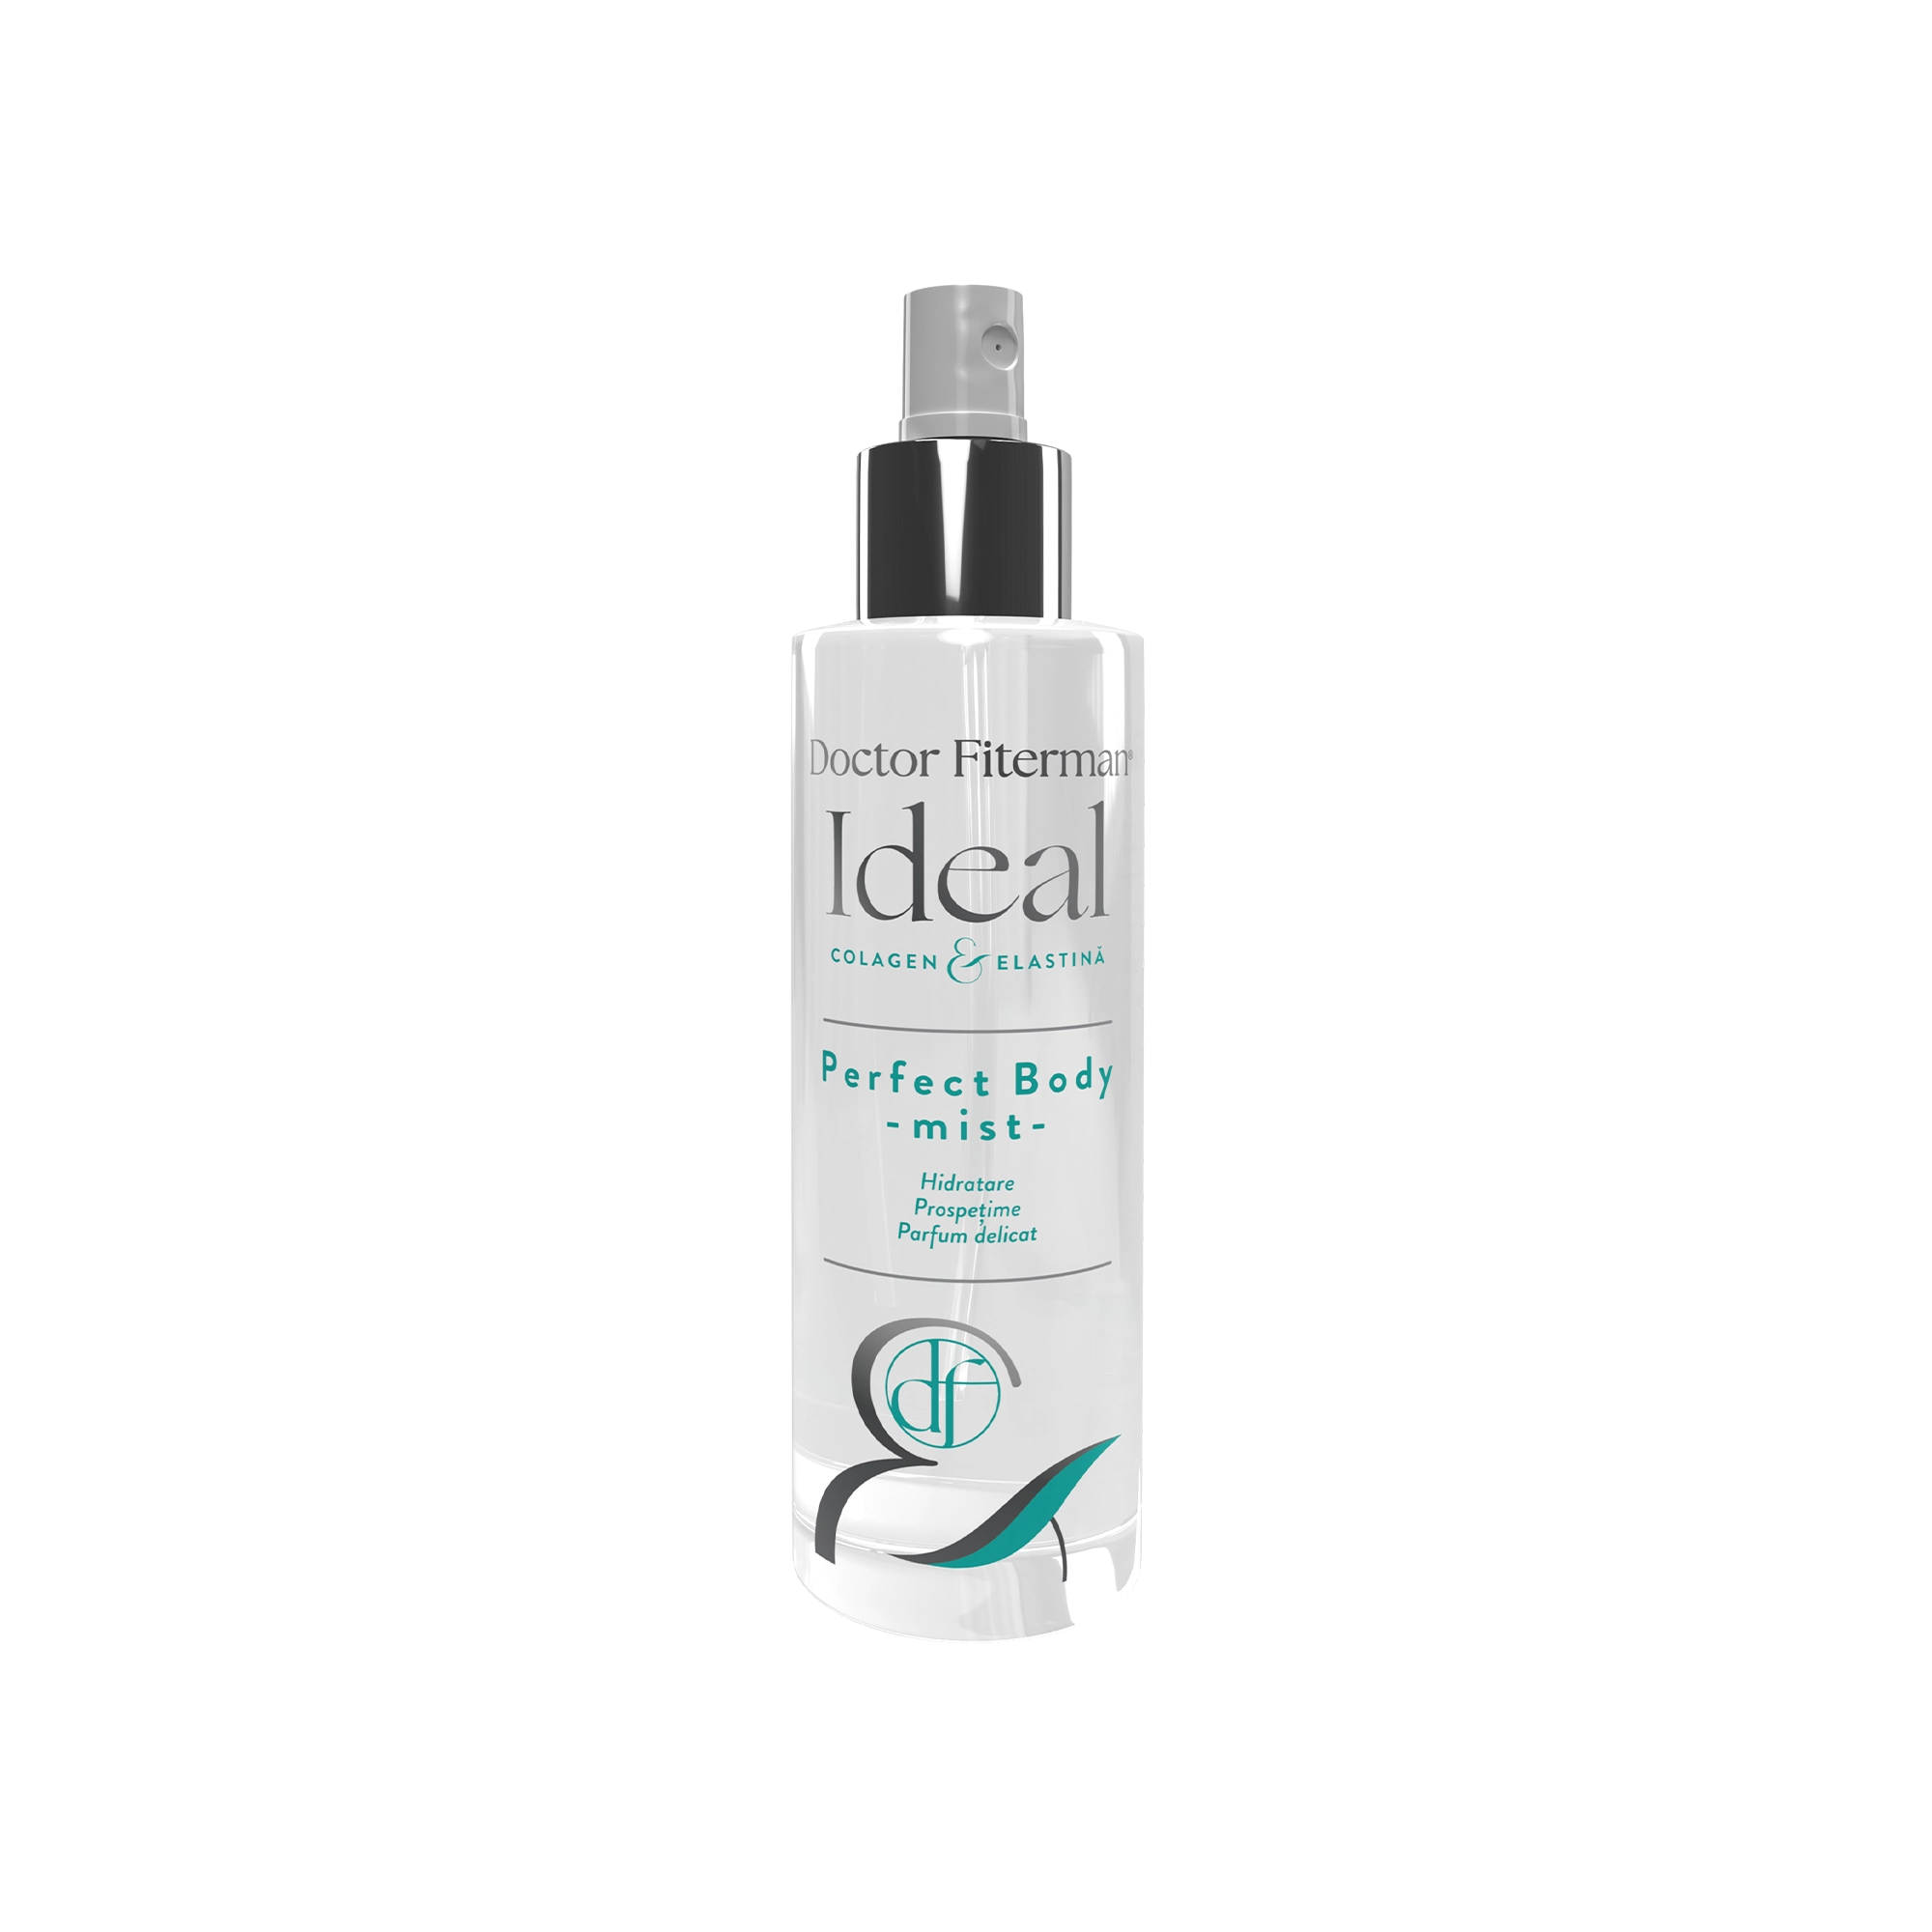 IDEAL - Perfect Body Mist